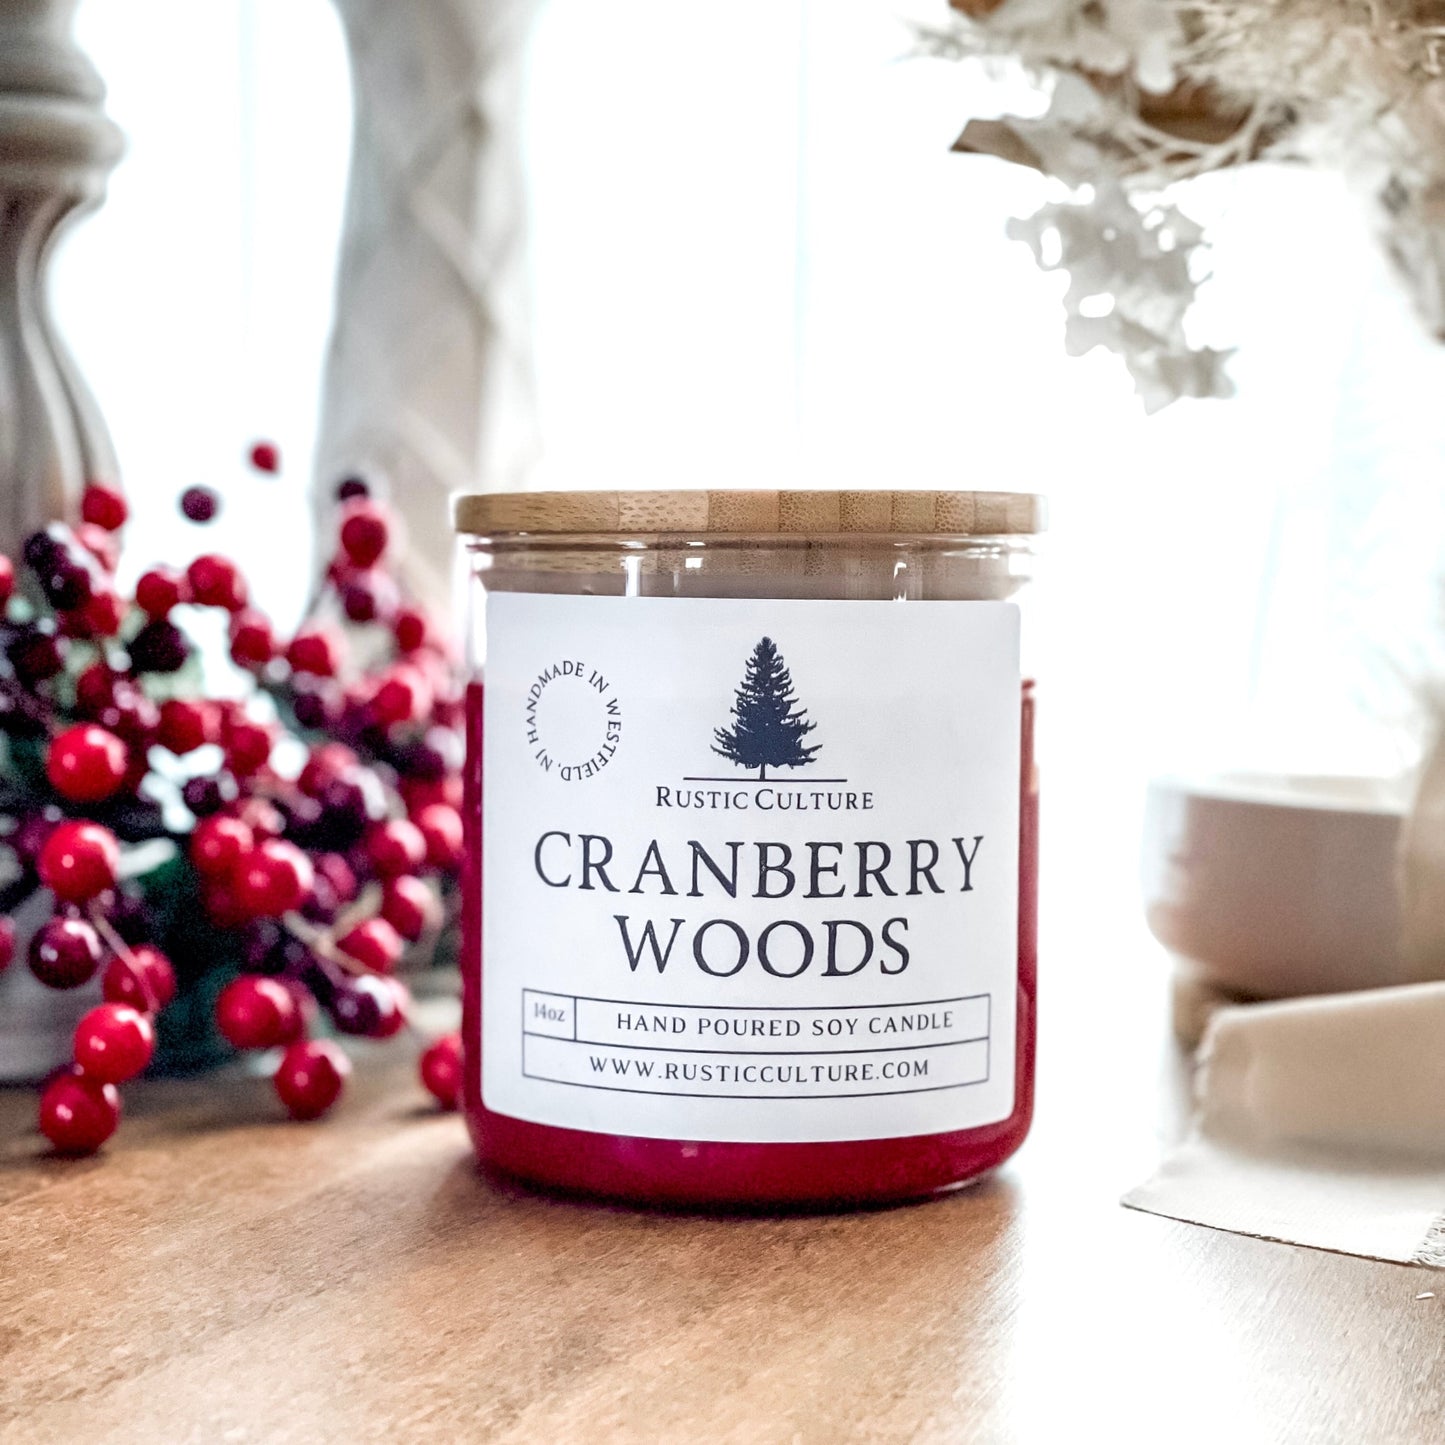 Cranberry Woods Candle made with organic soy wax. Perfect candle for fall and winter.